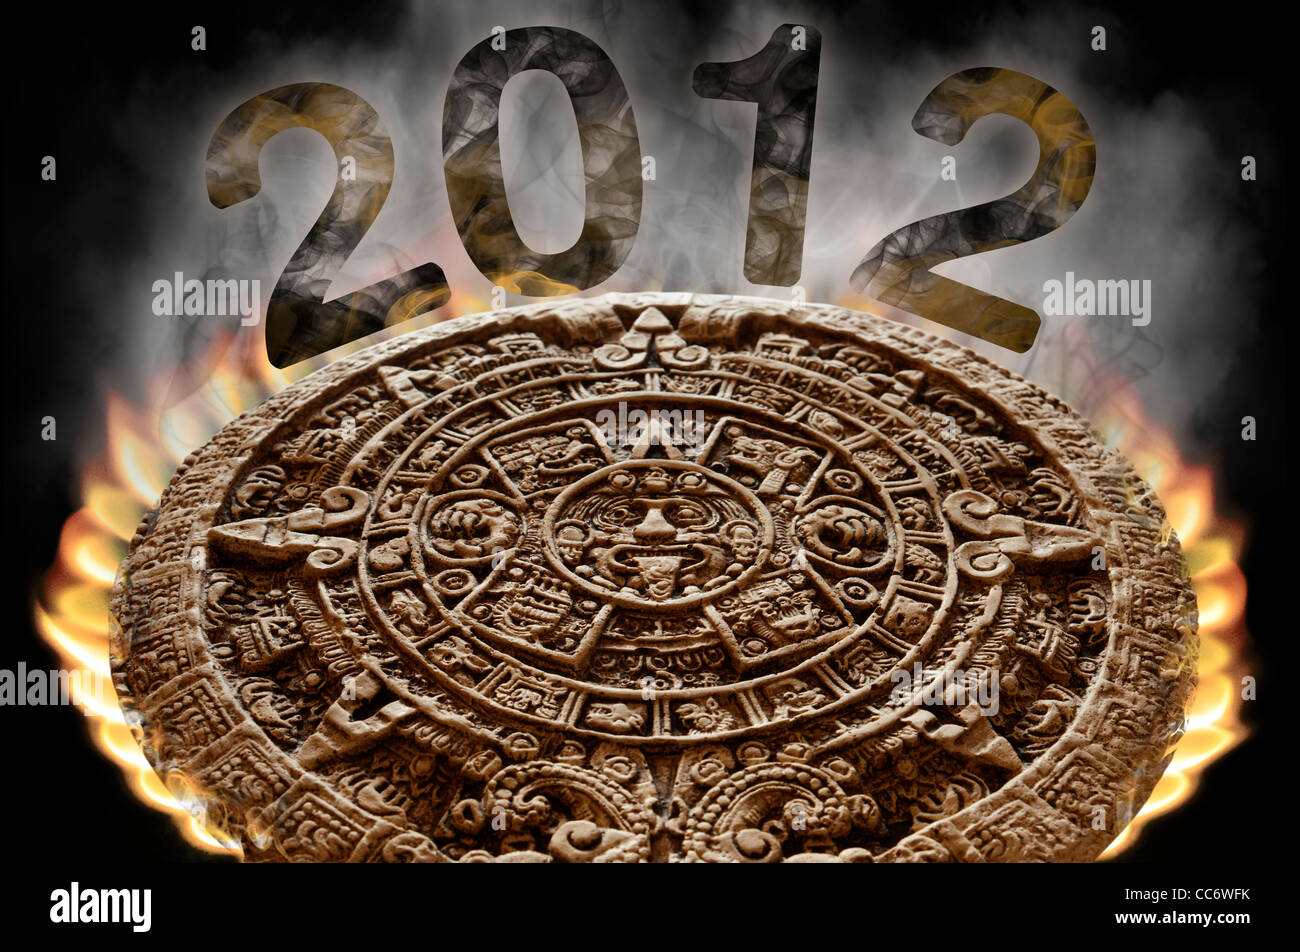 Apocalyptic Mayan Calendar on fire with smoke rising from its surface and 2012 visible in the smoke on a black background. Stock Photo